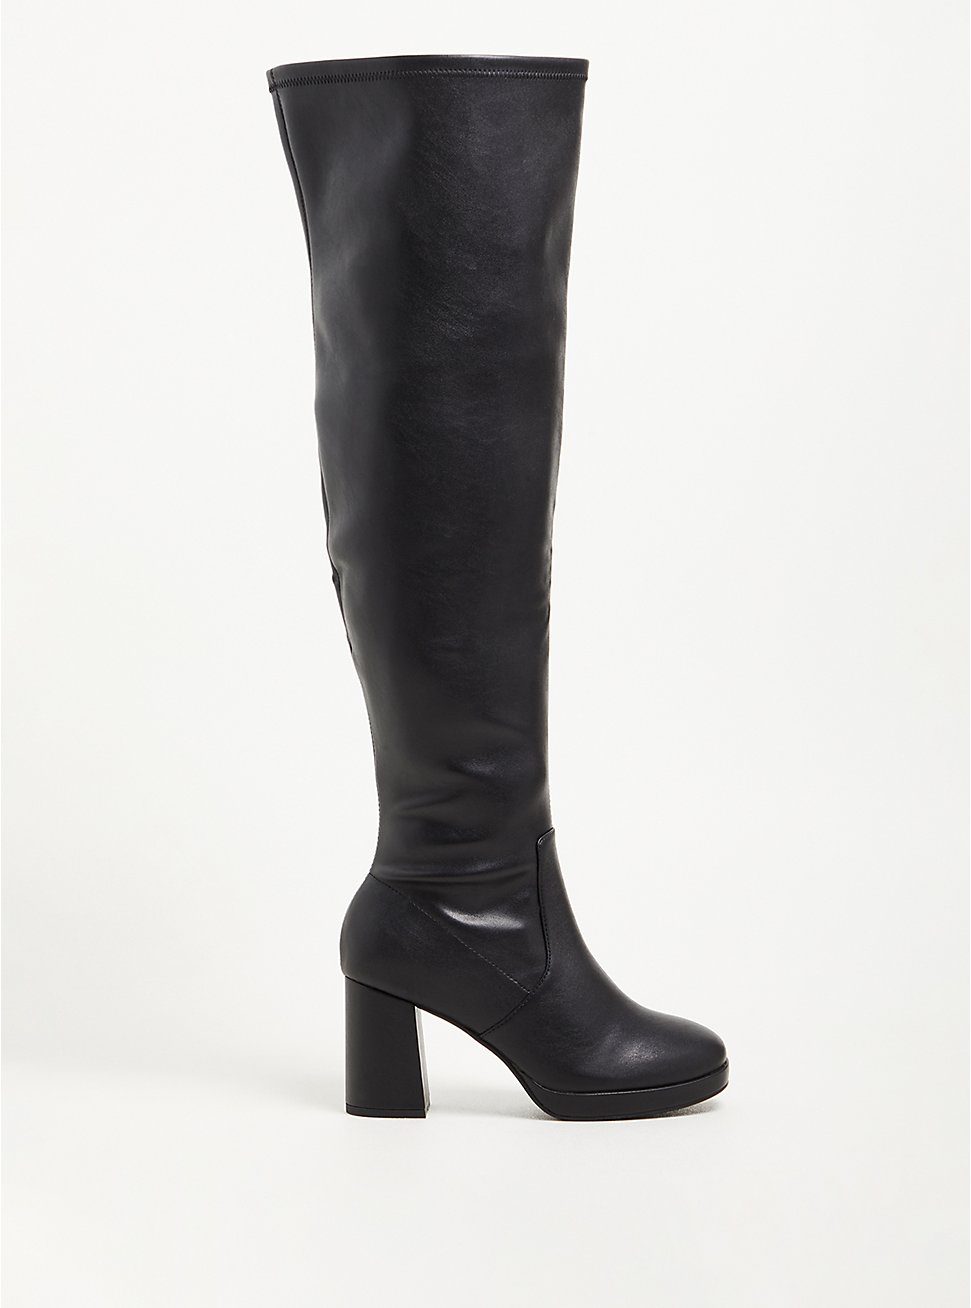 Plus Size - Stretch Heel Over The Knee Boot - Black Faux Leather (WW ...